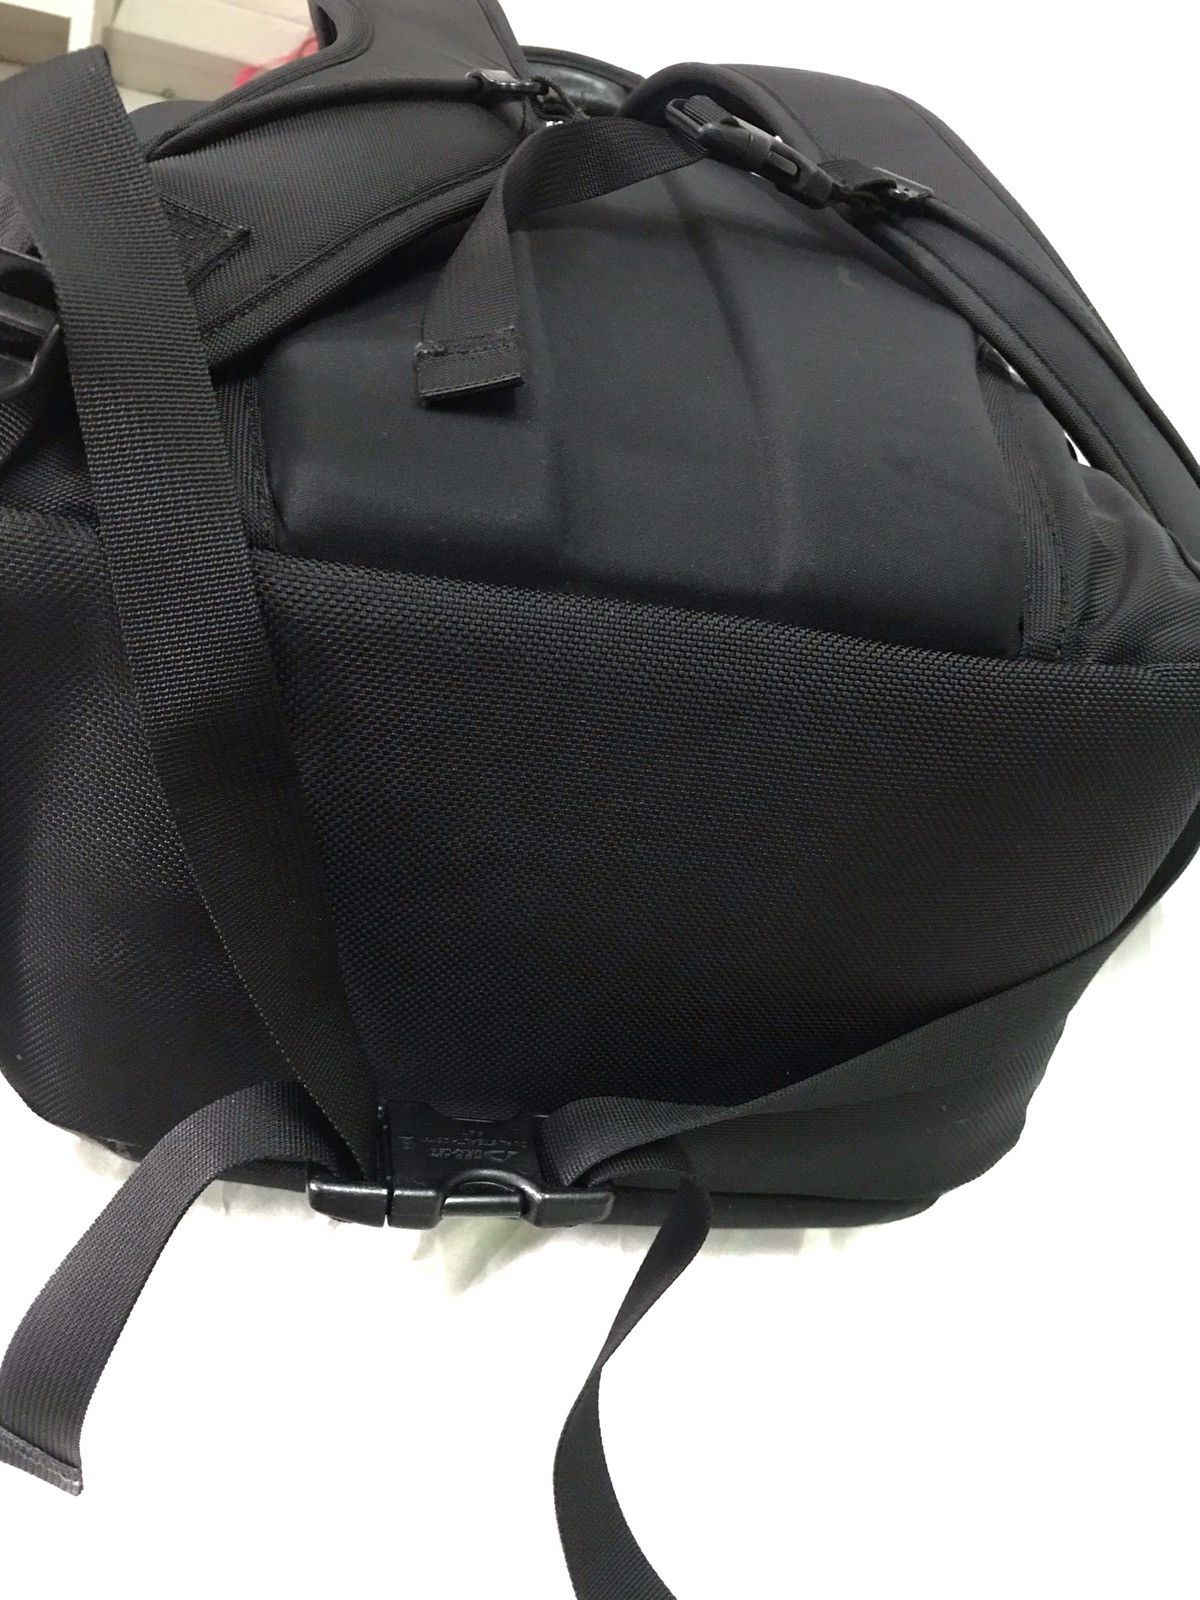 Authentic Gregory Laptop Size Backpack - 11